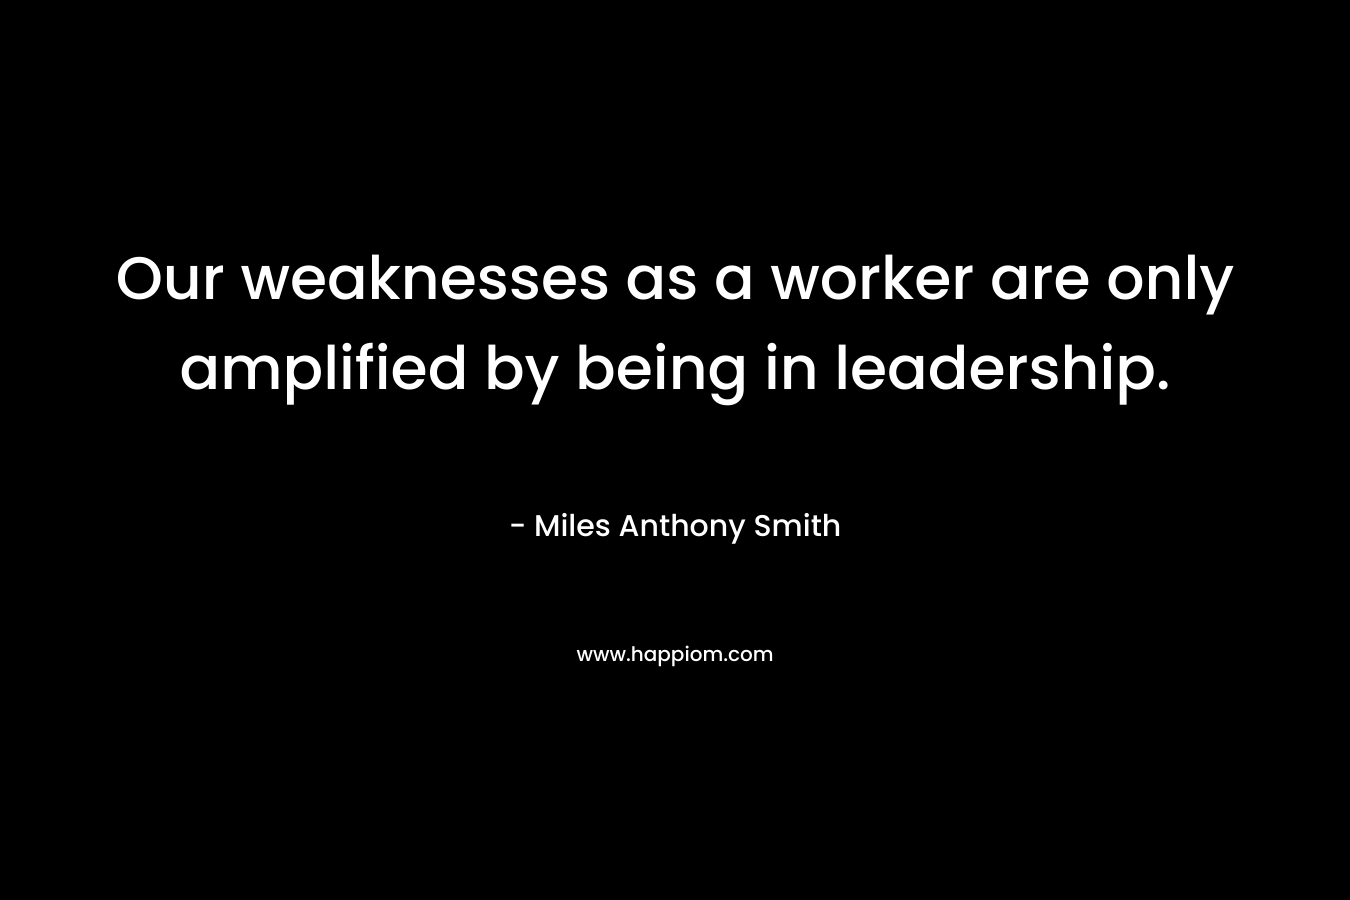 Our weaknesses as a worker are only amplified by being in leadership.